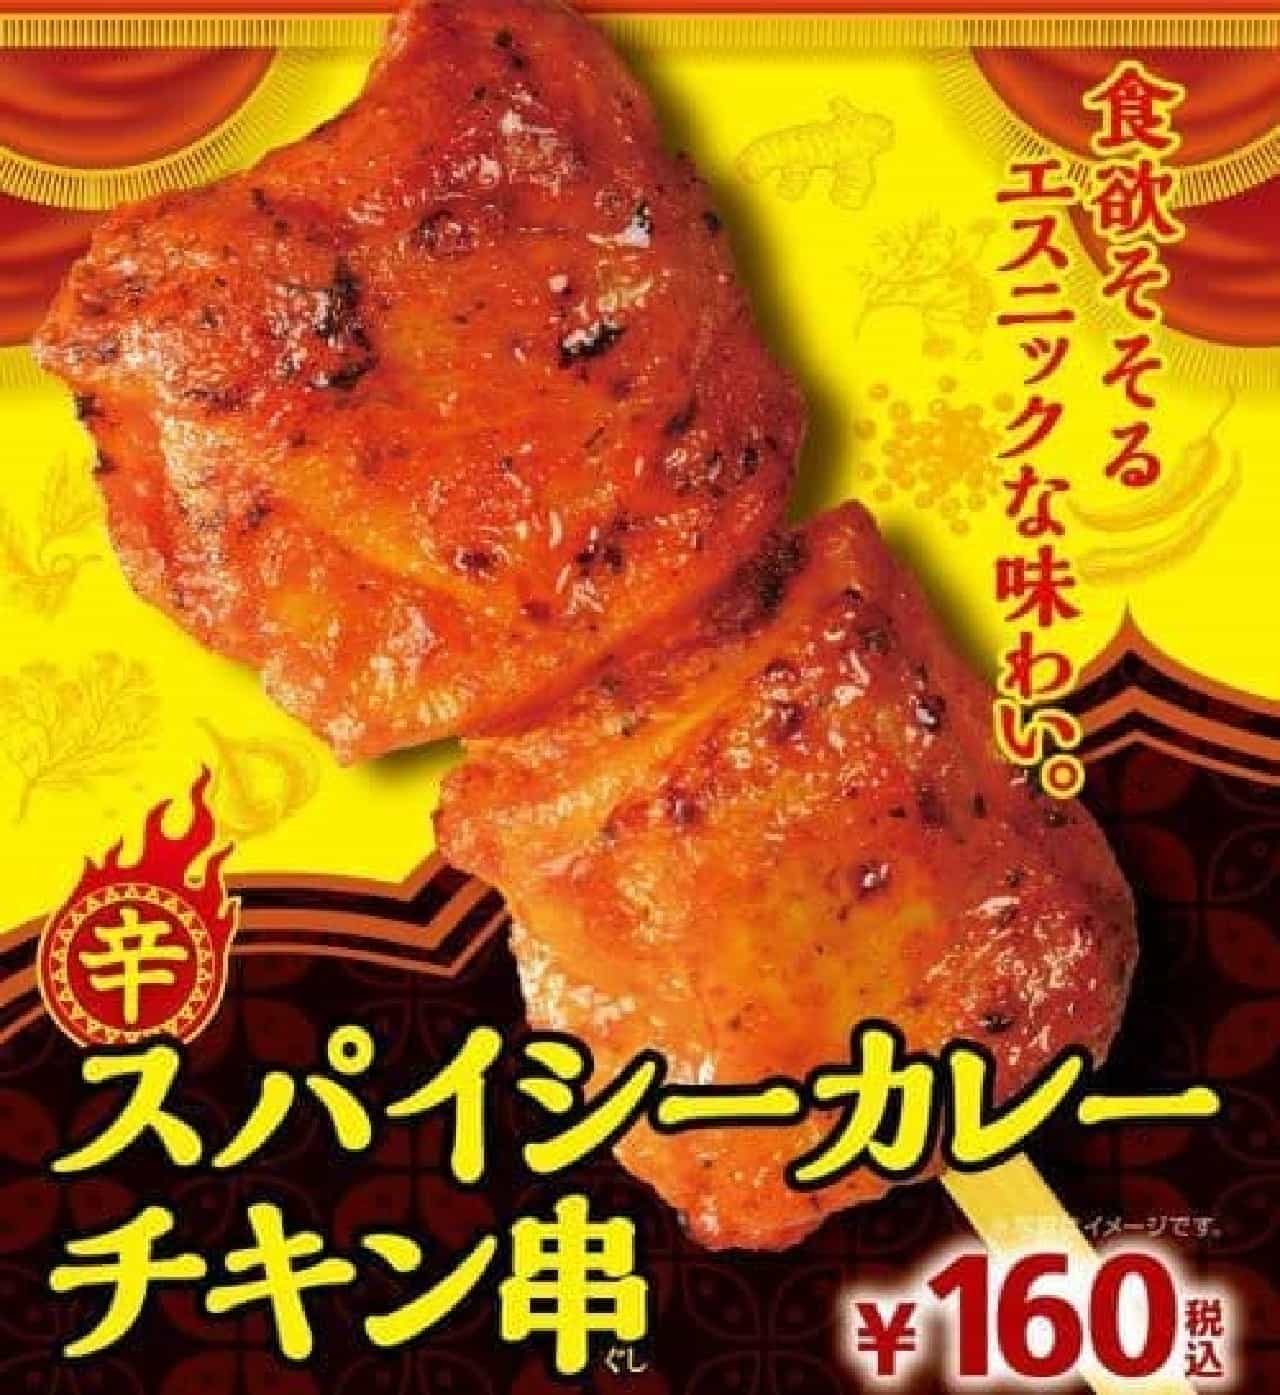 Ministop "Spicy Curry Chicken Skewers"